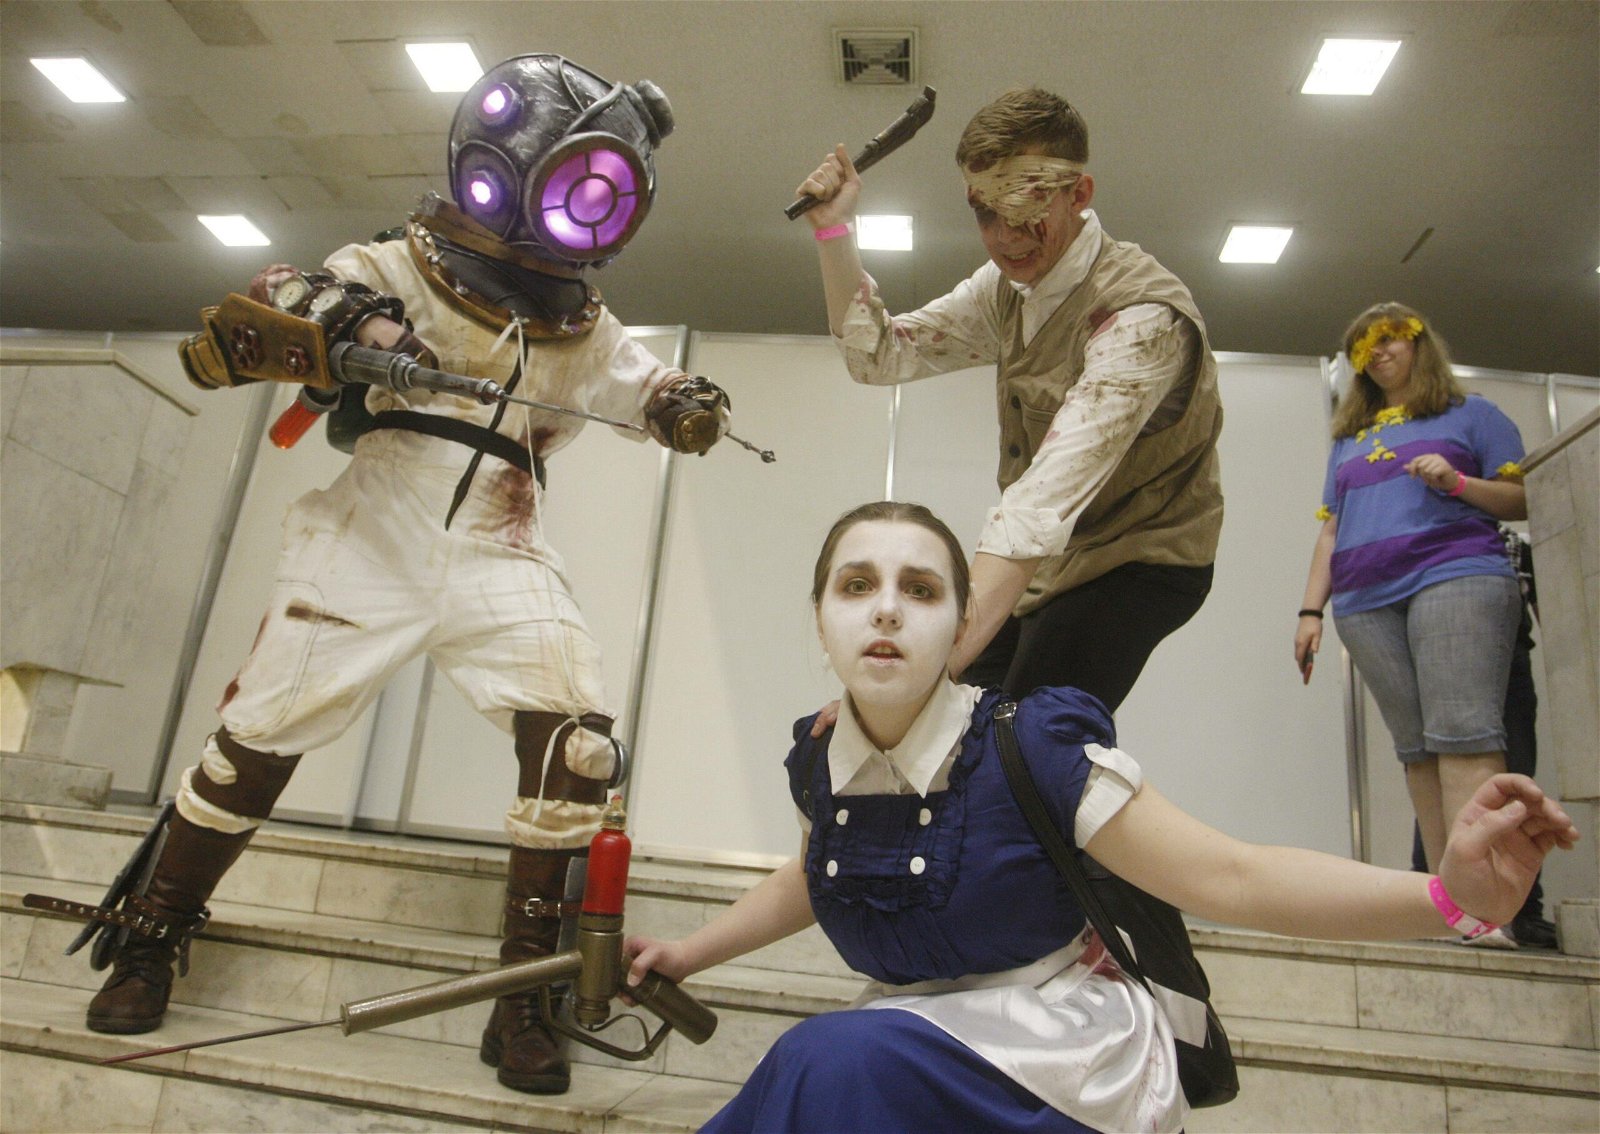 Fans dressed up as Bioshock characters at Kyiv Comic Con 2017